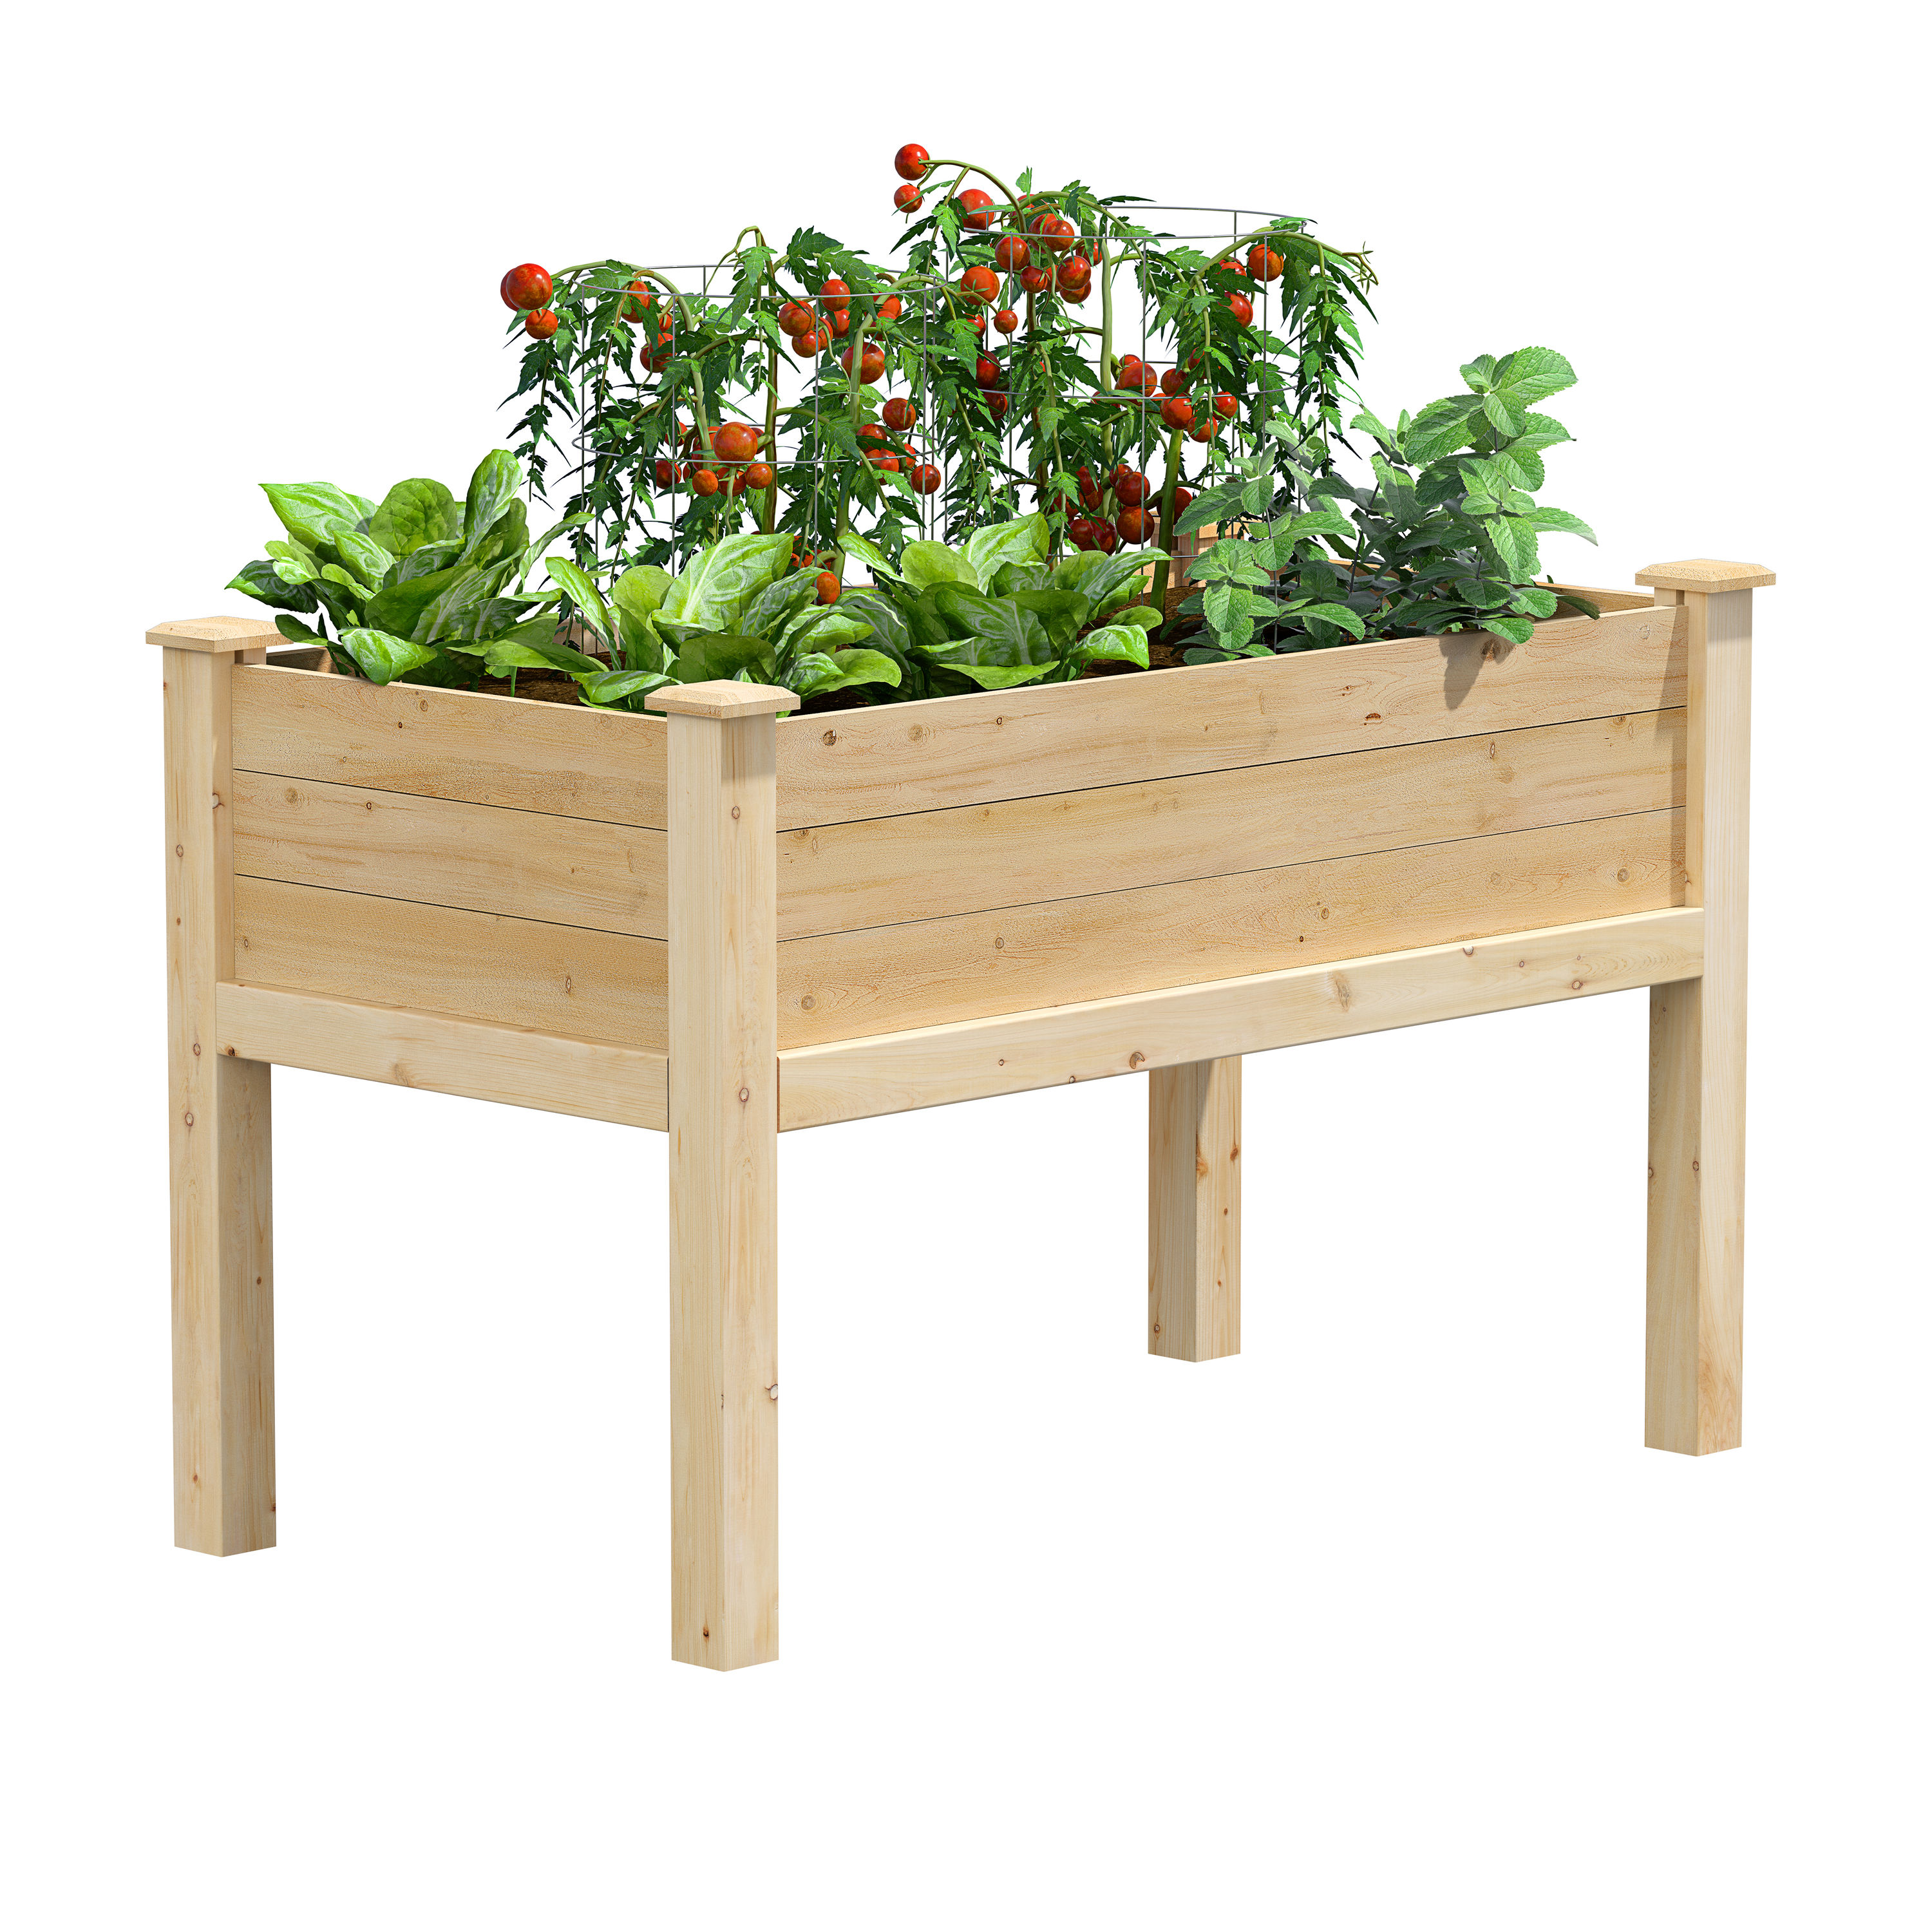 Set of 4 Raised garden planter box with legs Outdoor Indoor Planting Box Container for Garden Patio Balcony Backyard Porches Plastic Elevated Garden beds Kits with Brackets for Flowers Vegetables 